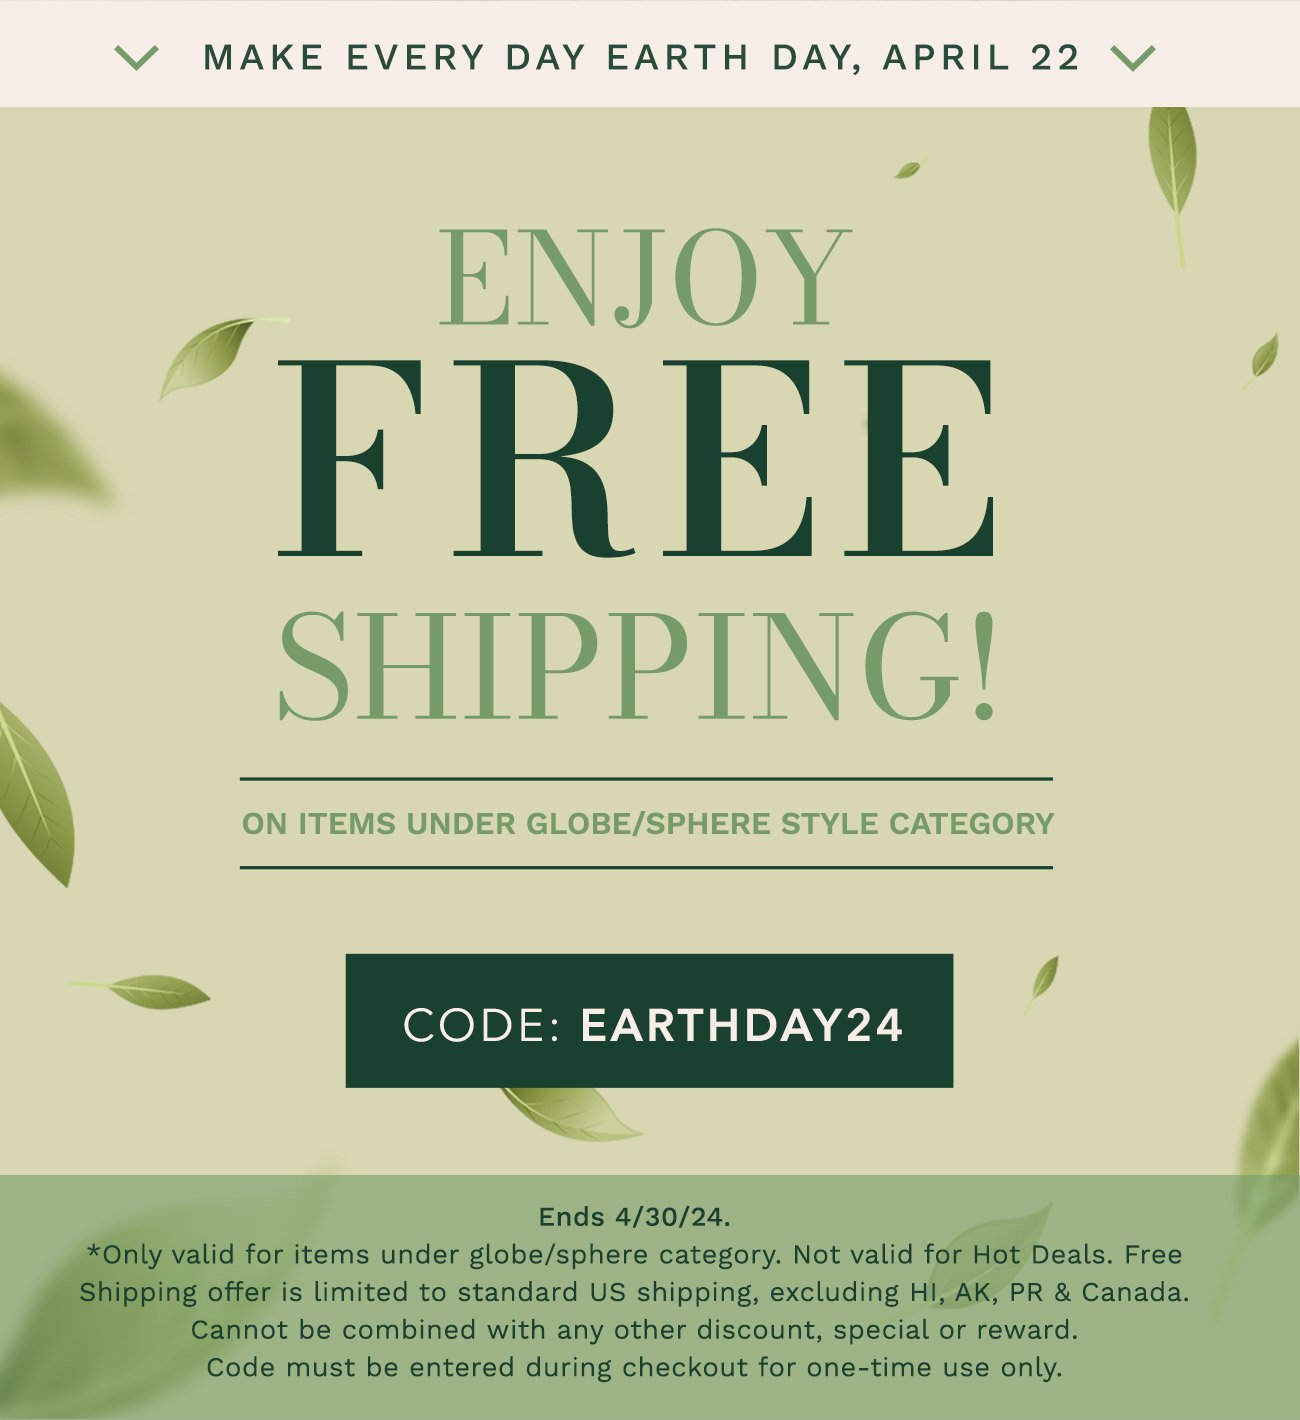 Enjoy Free Shipping for Items in the Globe and Sphere Category only. Code: EARTHDAY24.